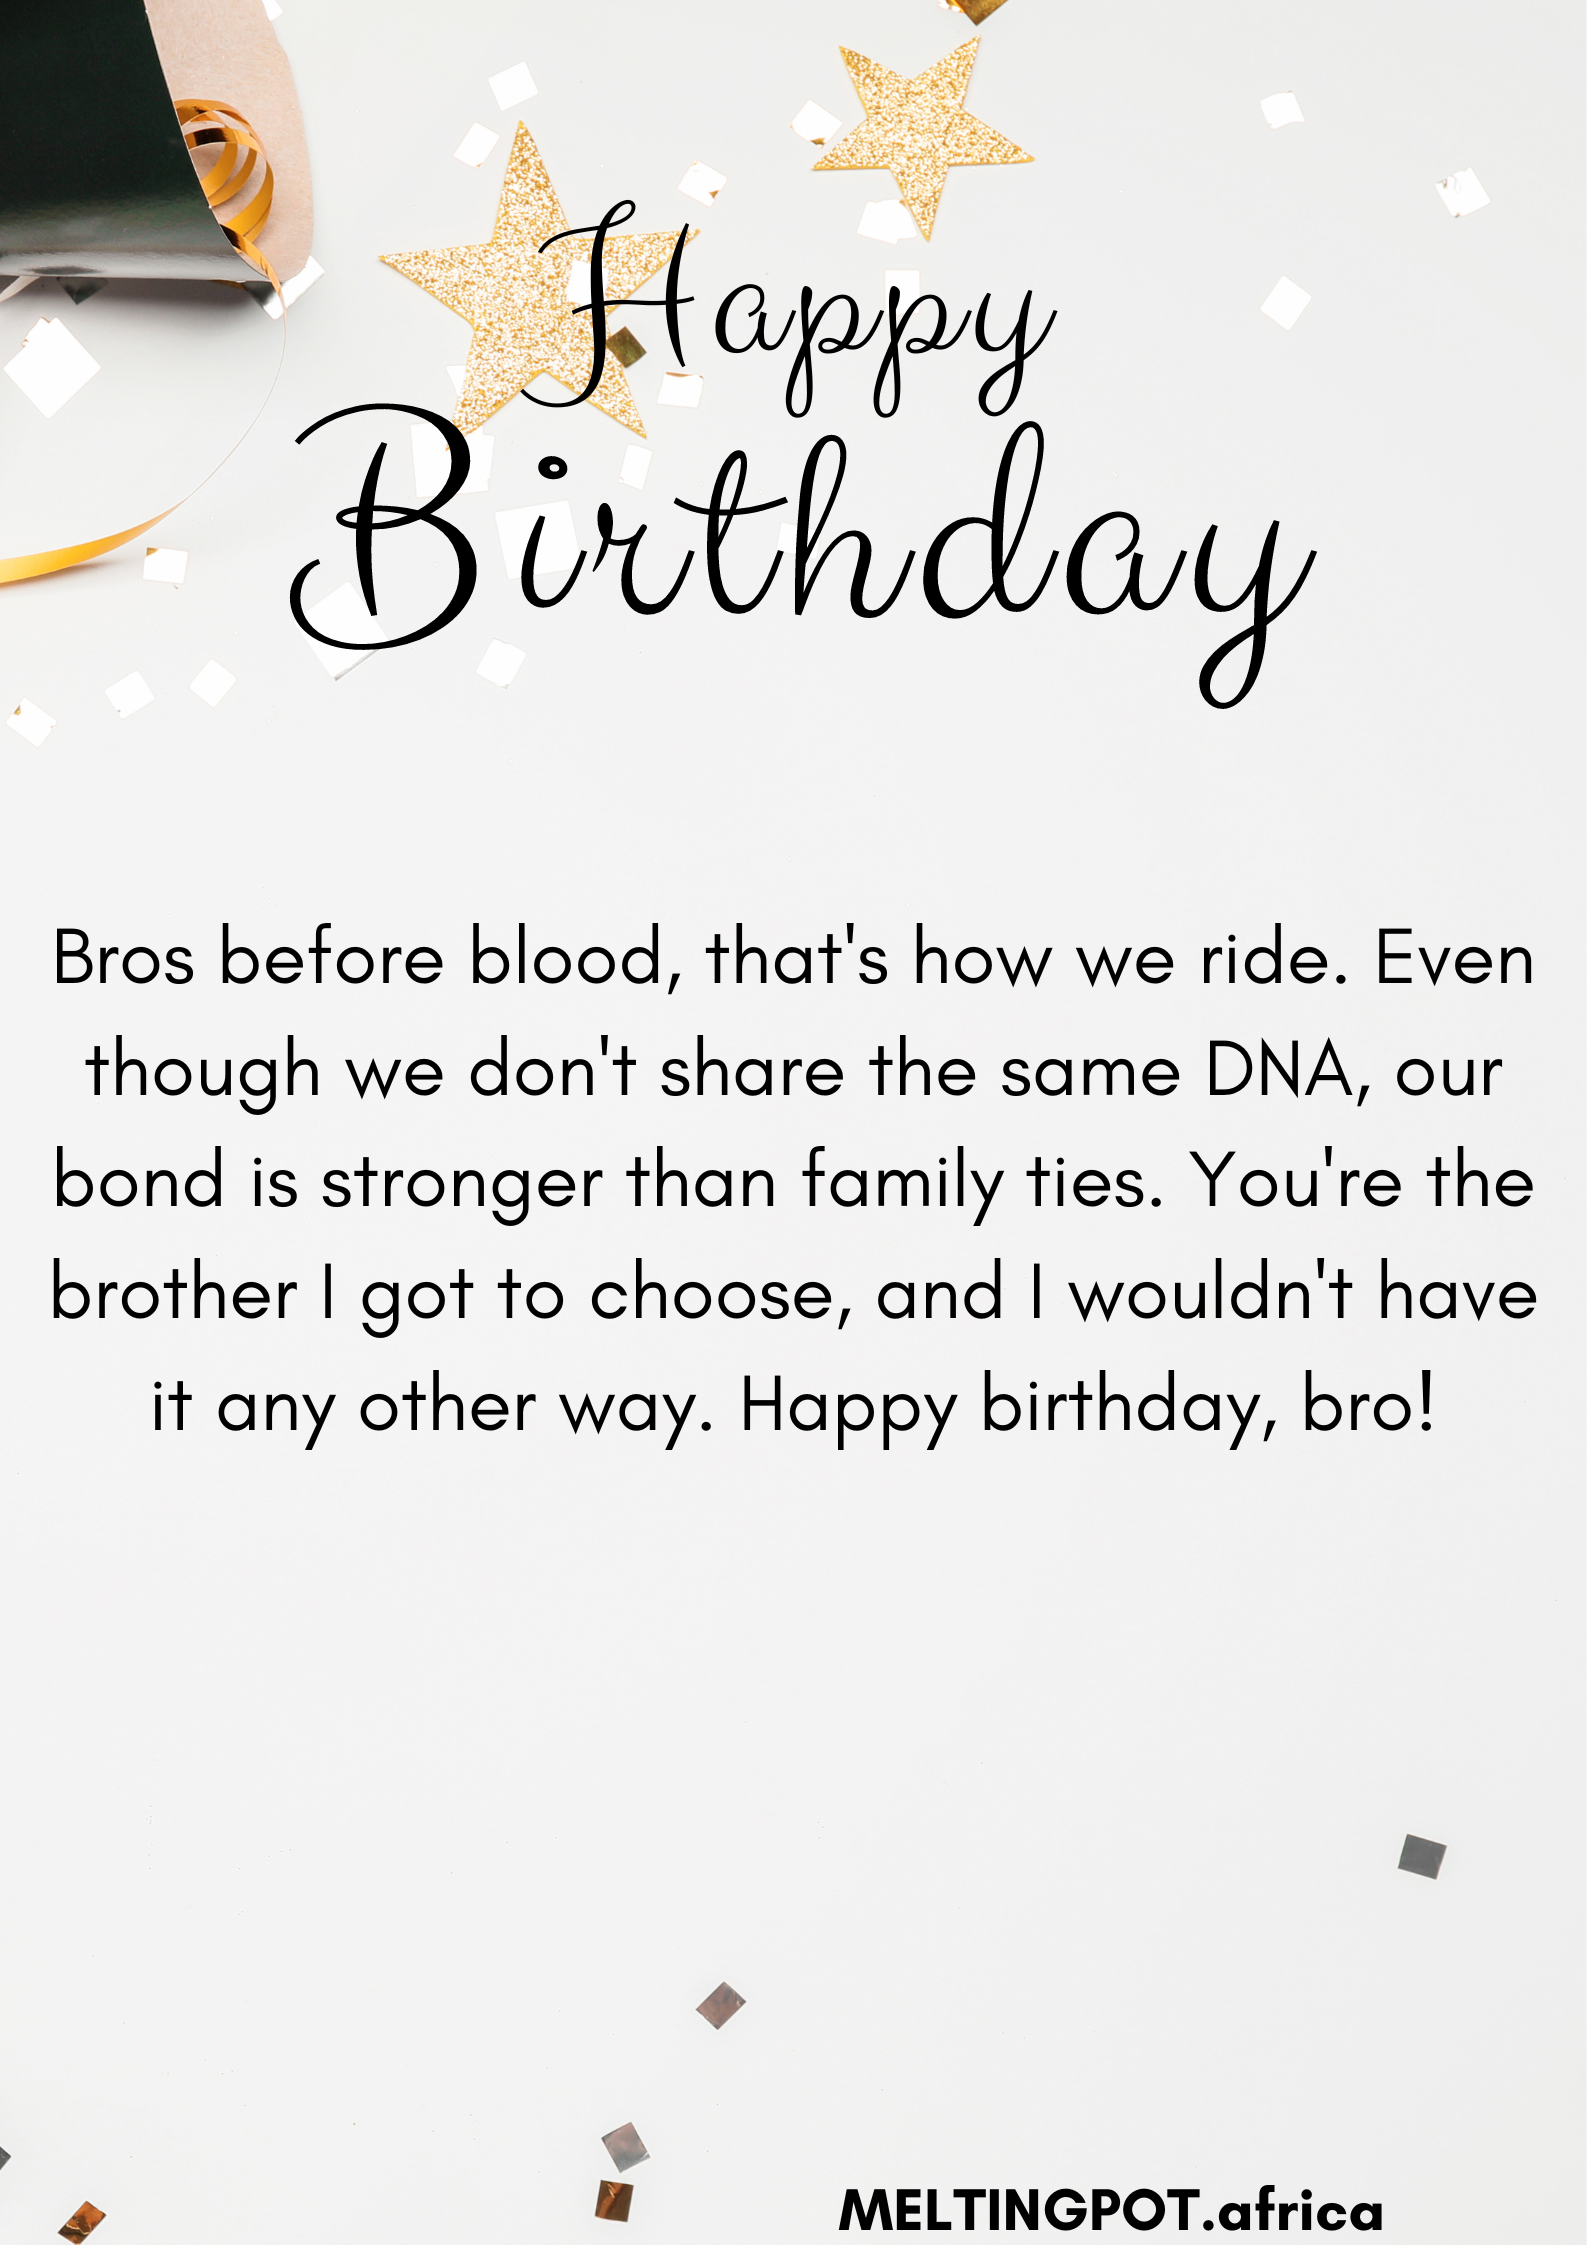 A brother doesn't have to be related by blood to be one of the most important people in your life. Your unbreakable friendship has formed a brotherhood stronger than biological ties alone. Here are lovely birthday wishes to send to your brother from another mother: